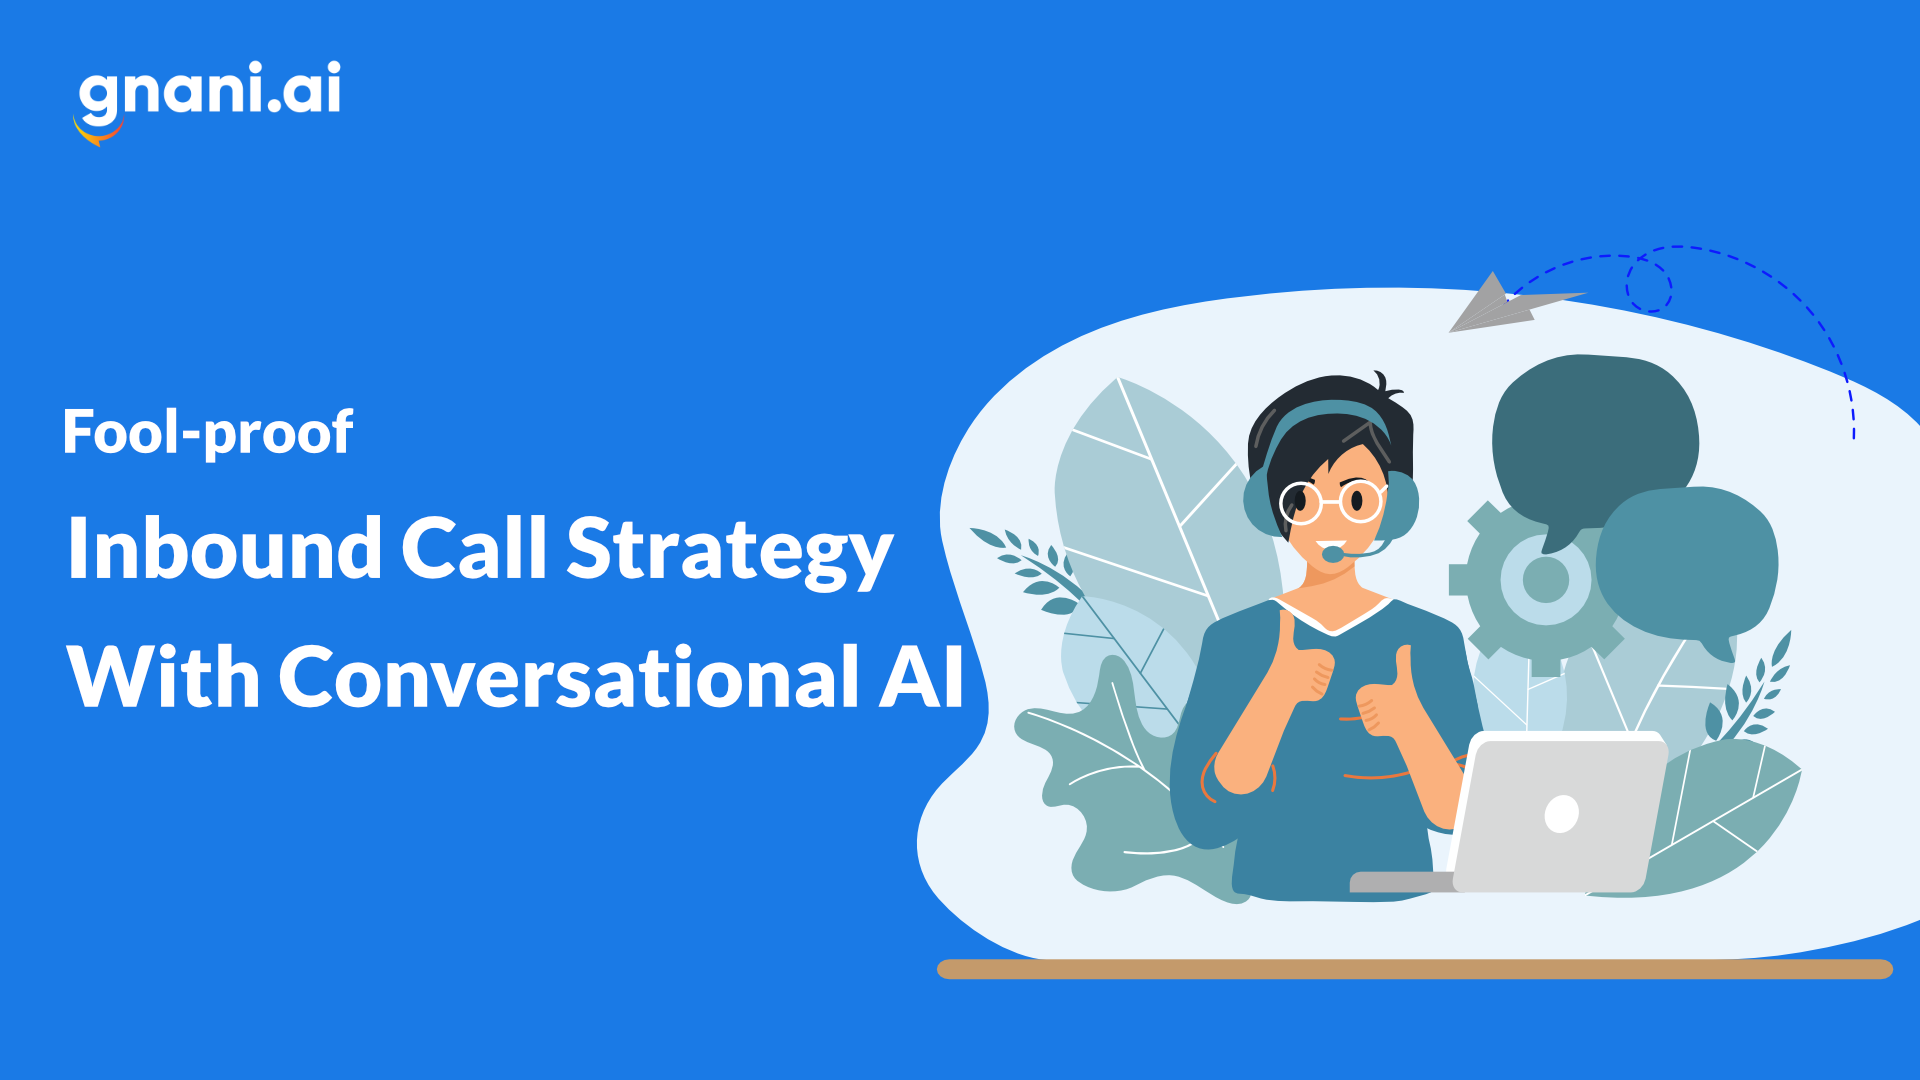 inbound call strategy with conversational AI